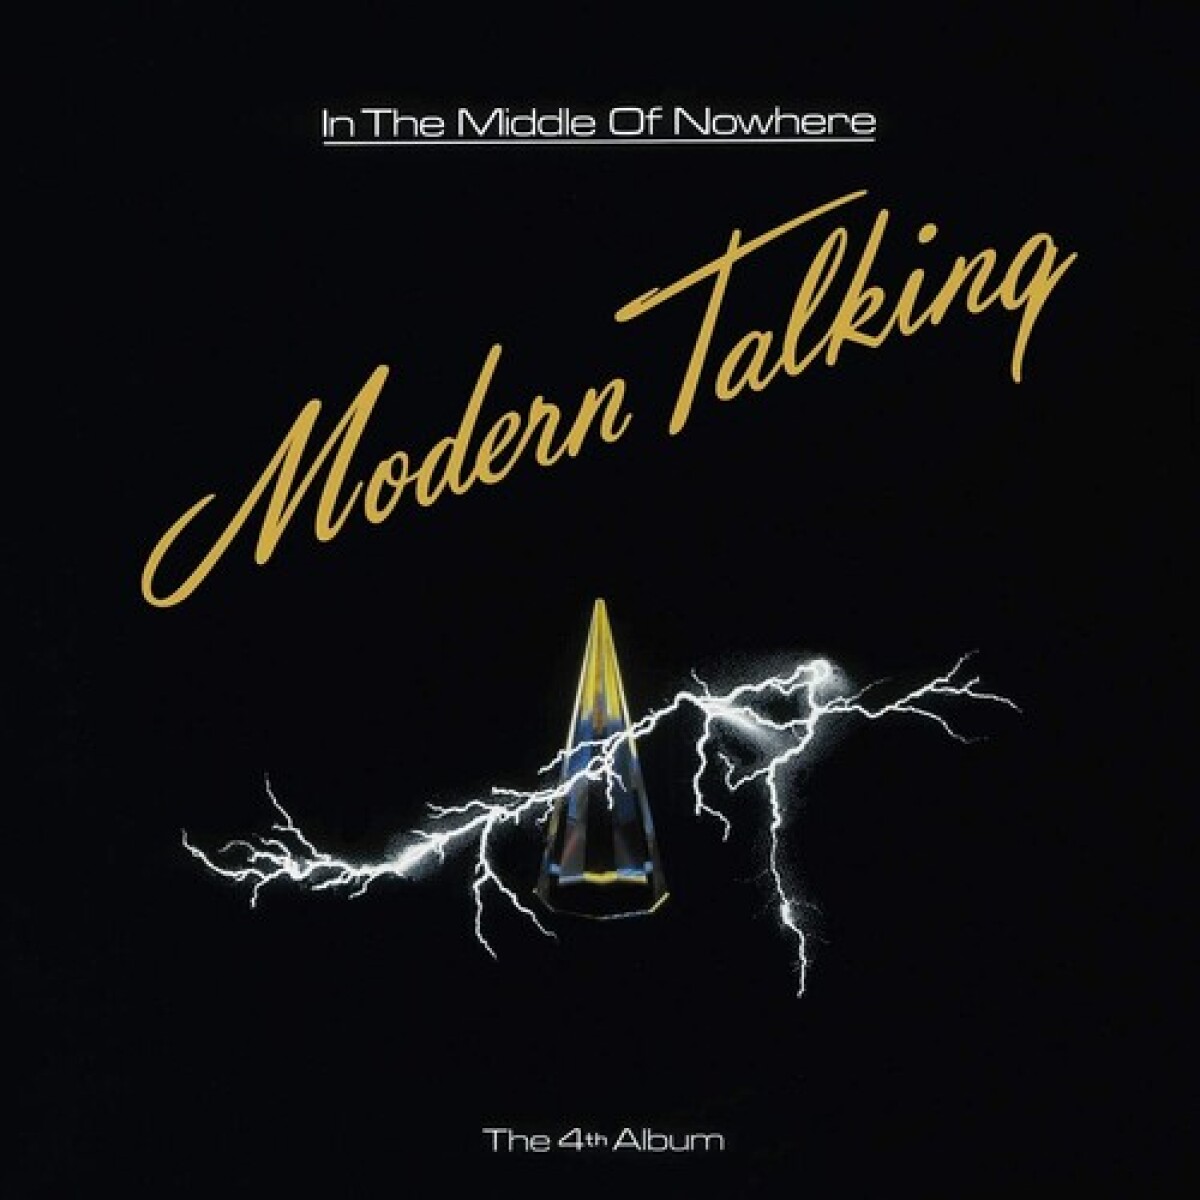 Modern Talking - In The Middle Of Nowhere - Vinilo 